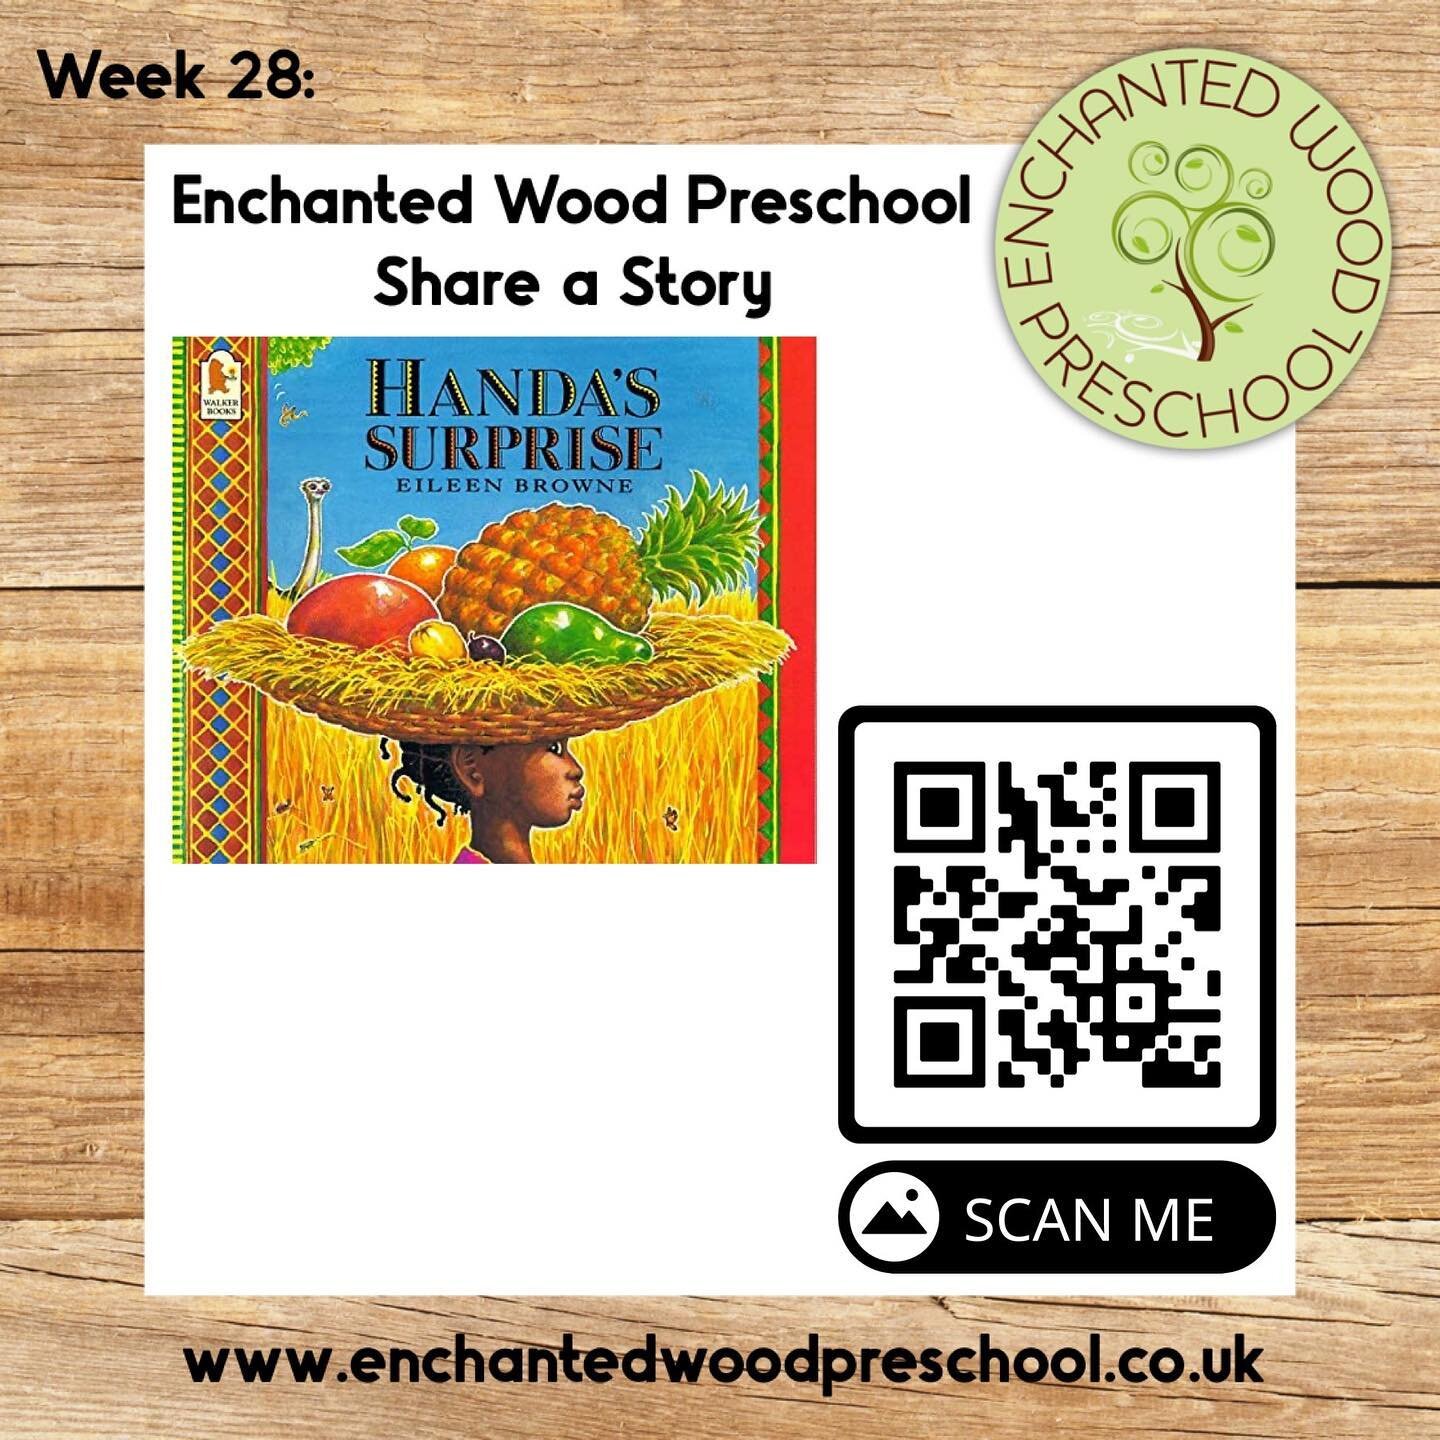 🌳 Week 29: Countries Special to Us

Our book of the week is &lsquo;Handa&rsquo;s Surprise&rsquo;

🇰🇪 🍊 🦅 🐐 🍌 🍍 🙉 🦓 🥑 🐘 🧺 

Set in a village of the Luo tribe in south-west Kenya, Eileen Browne's 'Handa's Surprise' is a story about a girl,